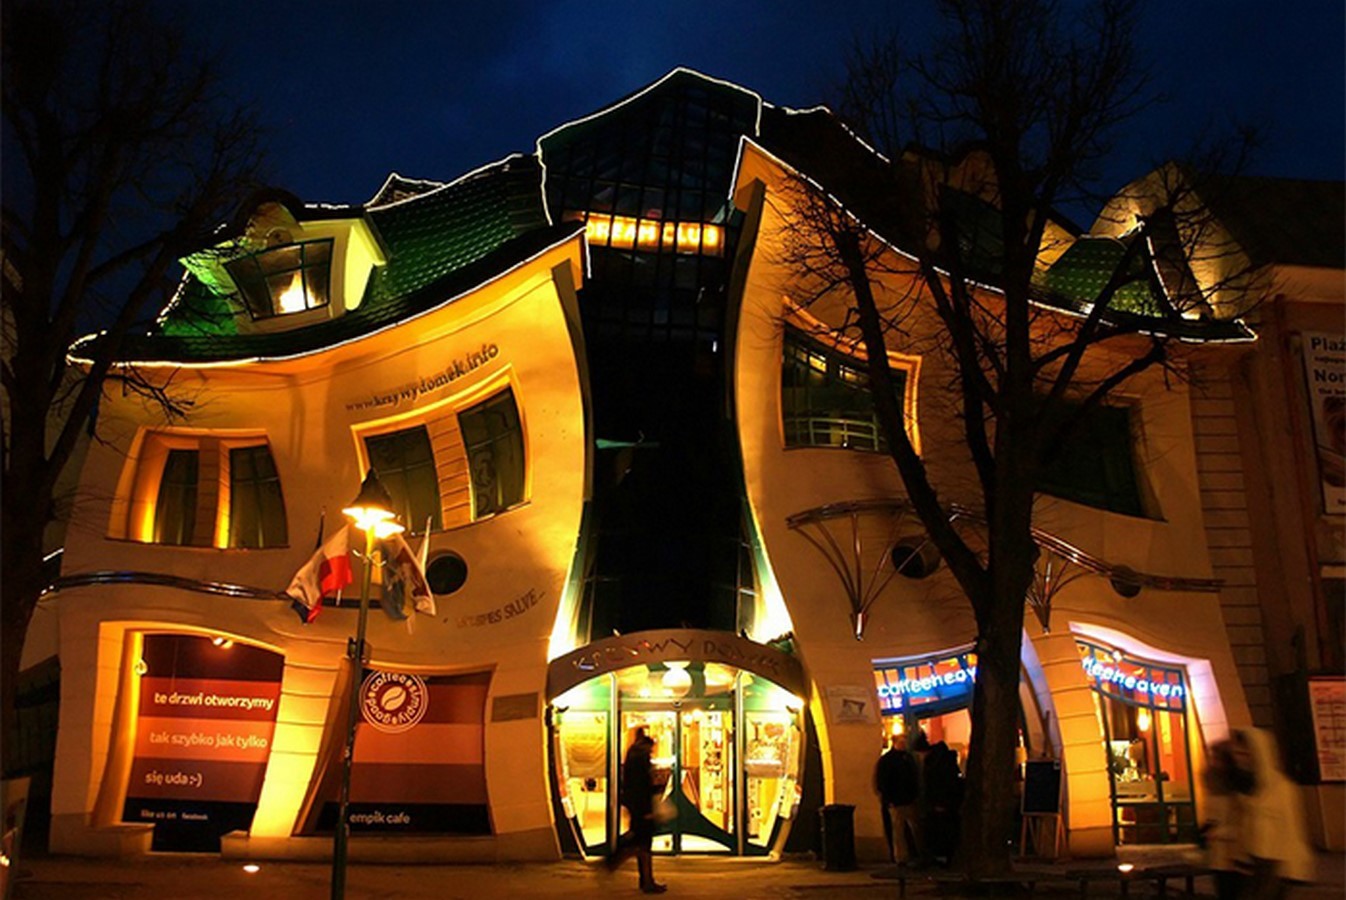 Famous architecture - The Crooked House by Szotynscy and Zalenski - Sheet2